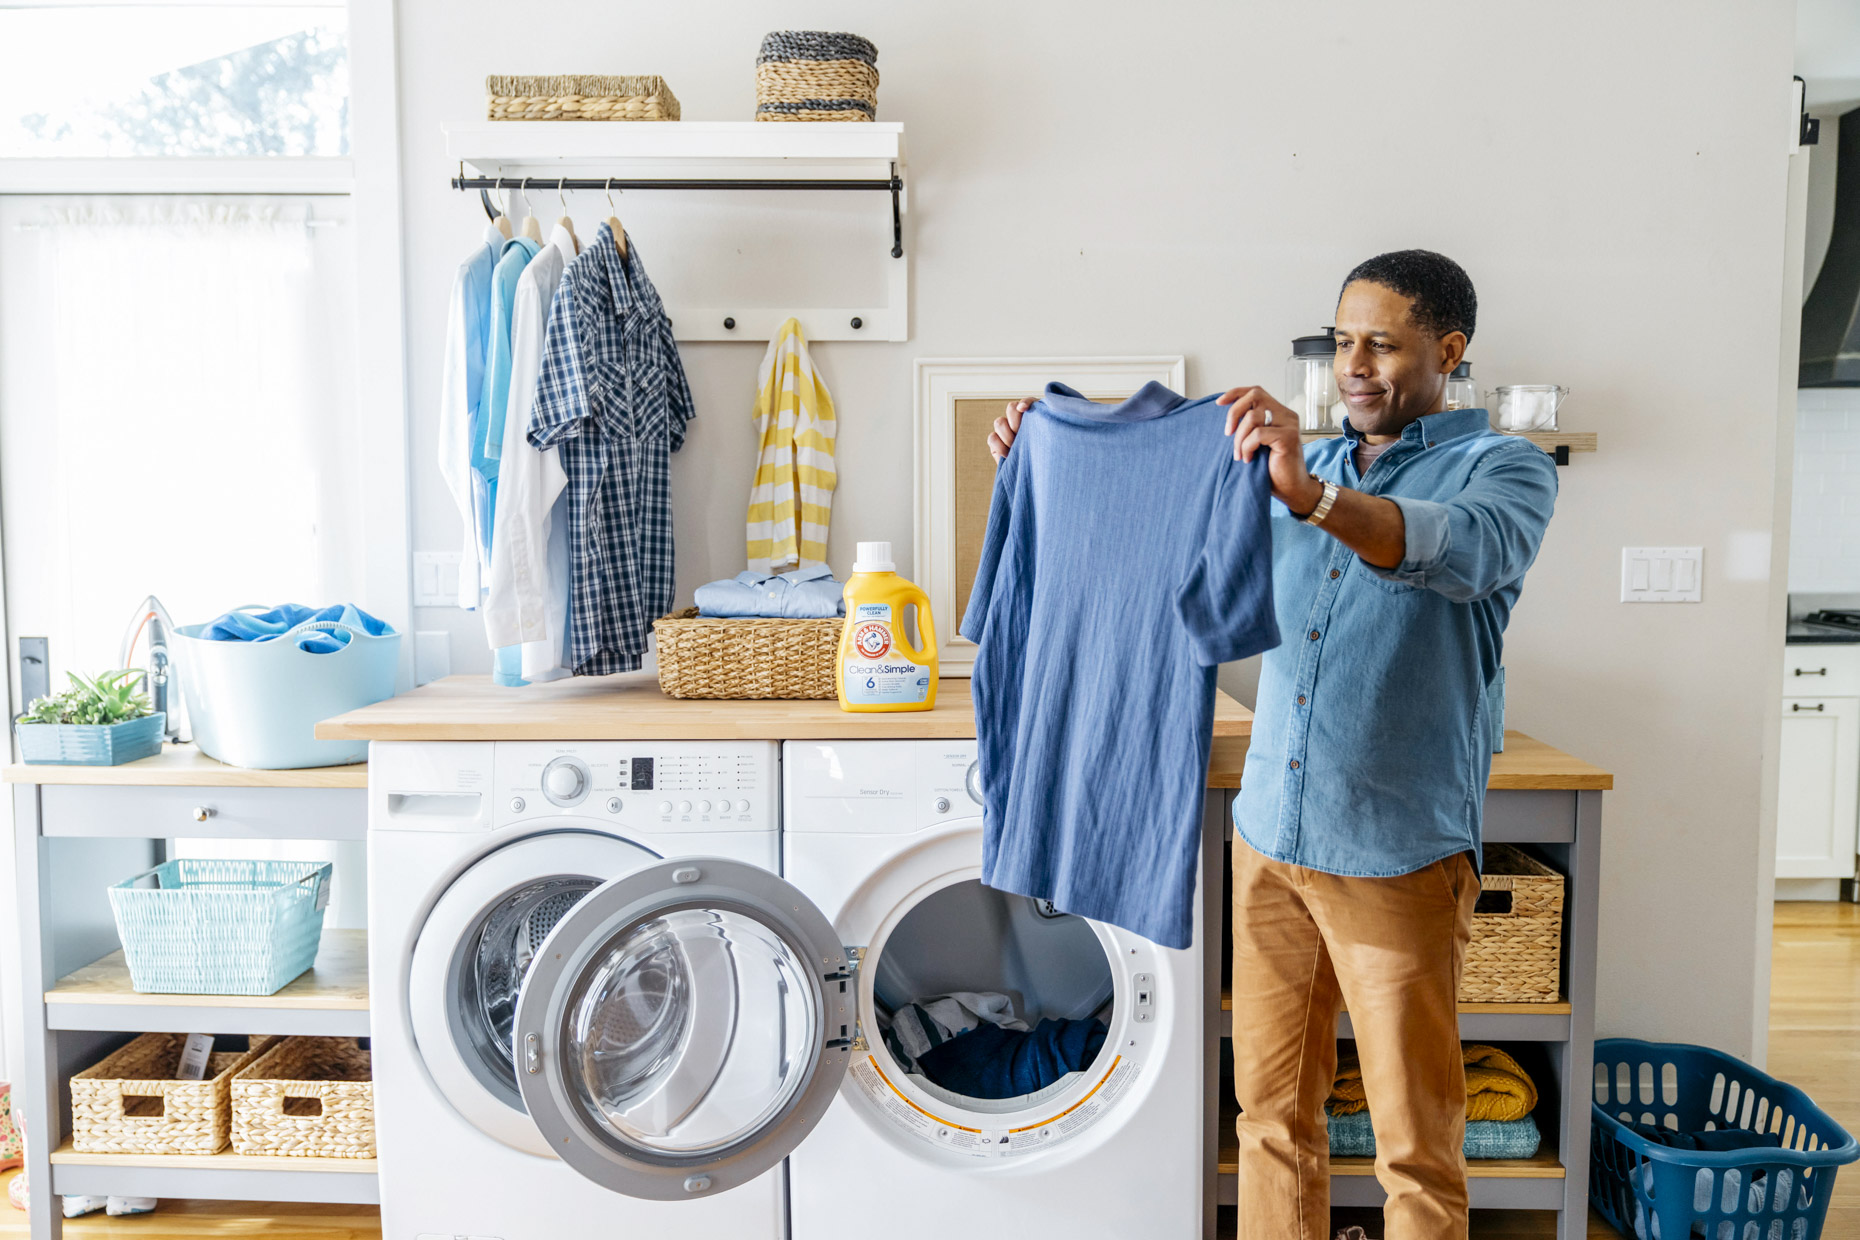 Man holding up freshly washed shirt in laundry room